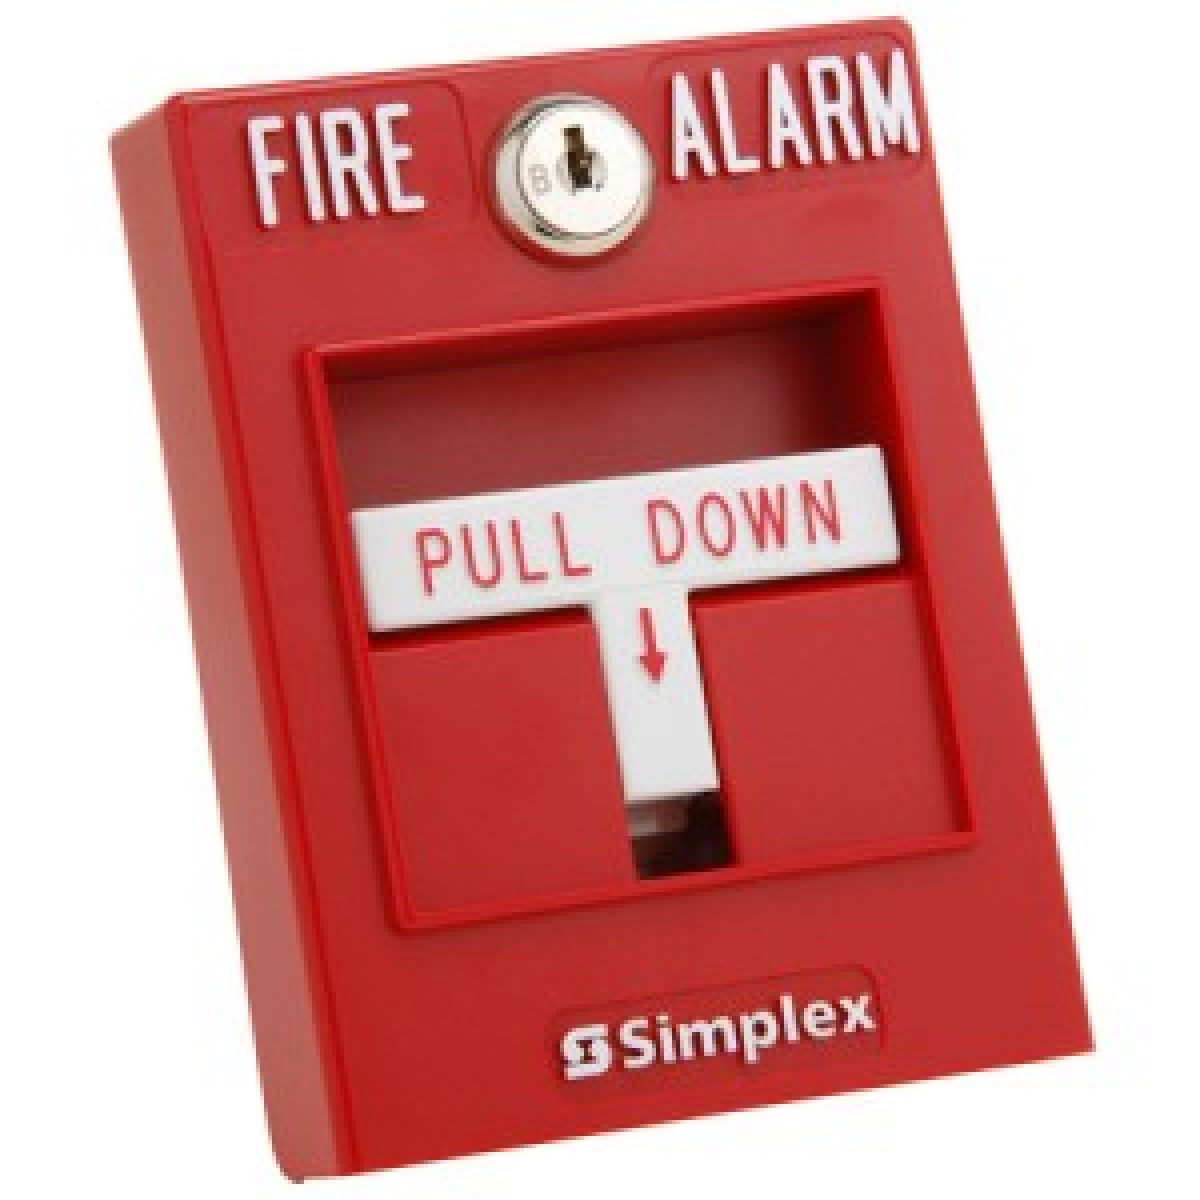 2 NEW SIMPLEX B STYLE KEY FOR FIRE ALARM PANEL AND PULL STATIONS 